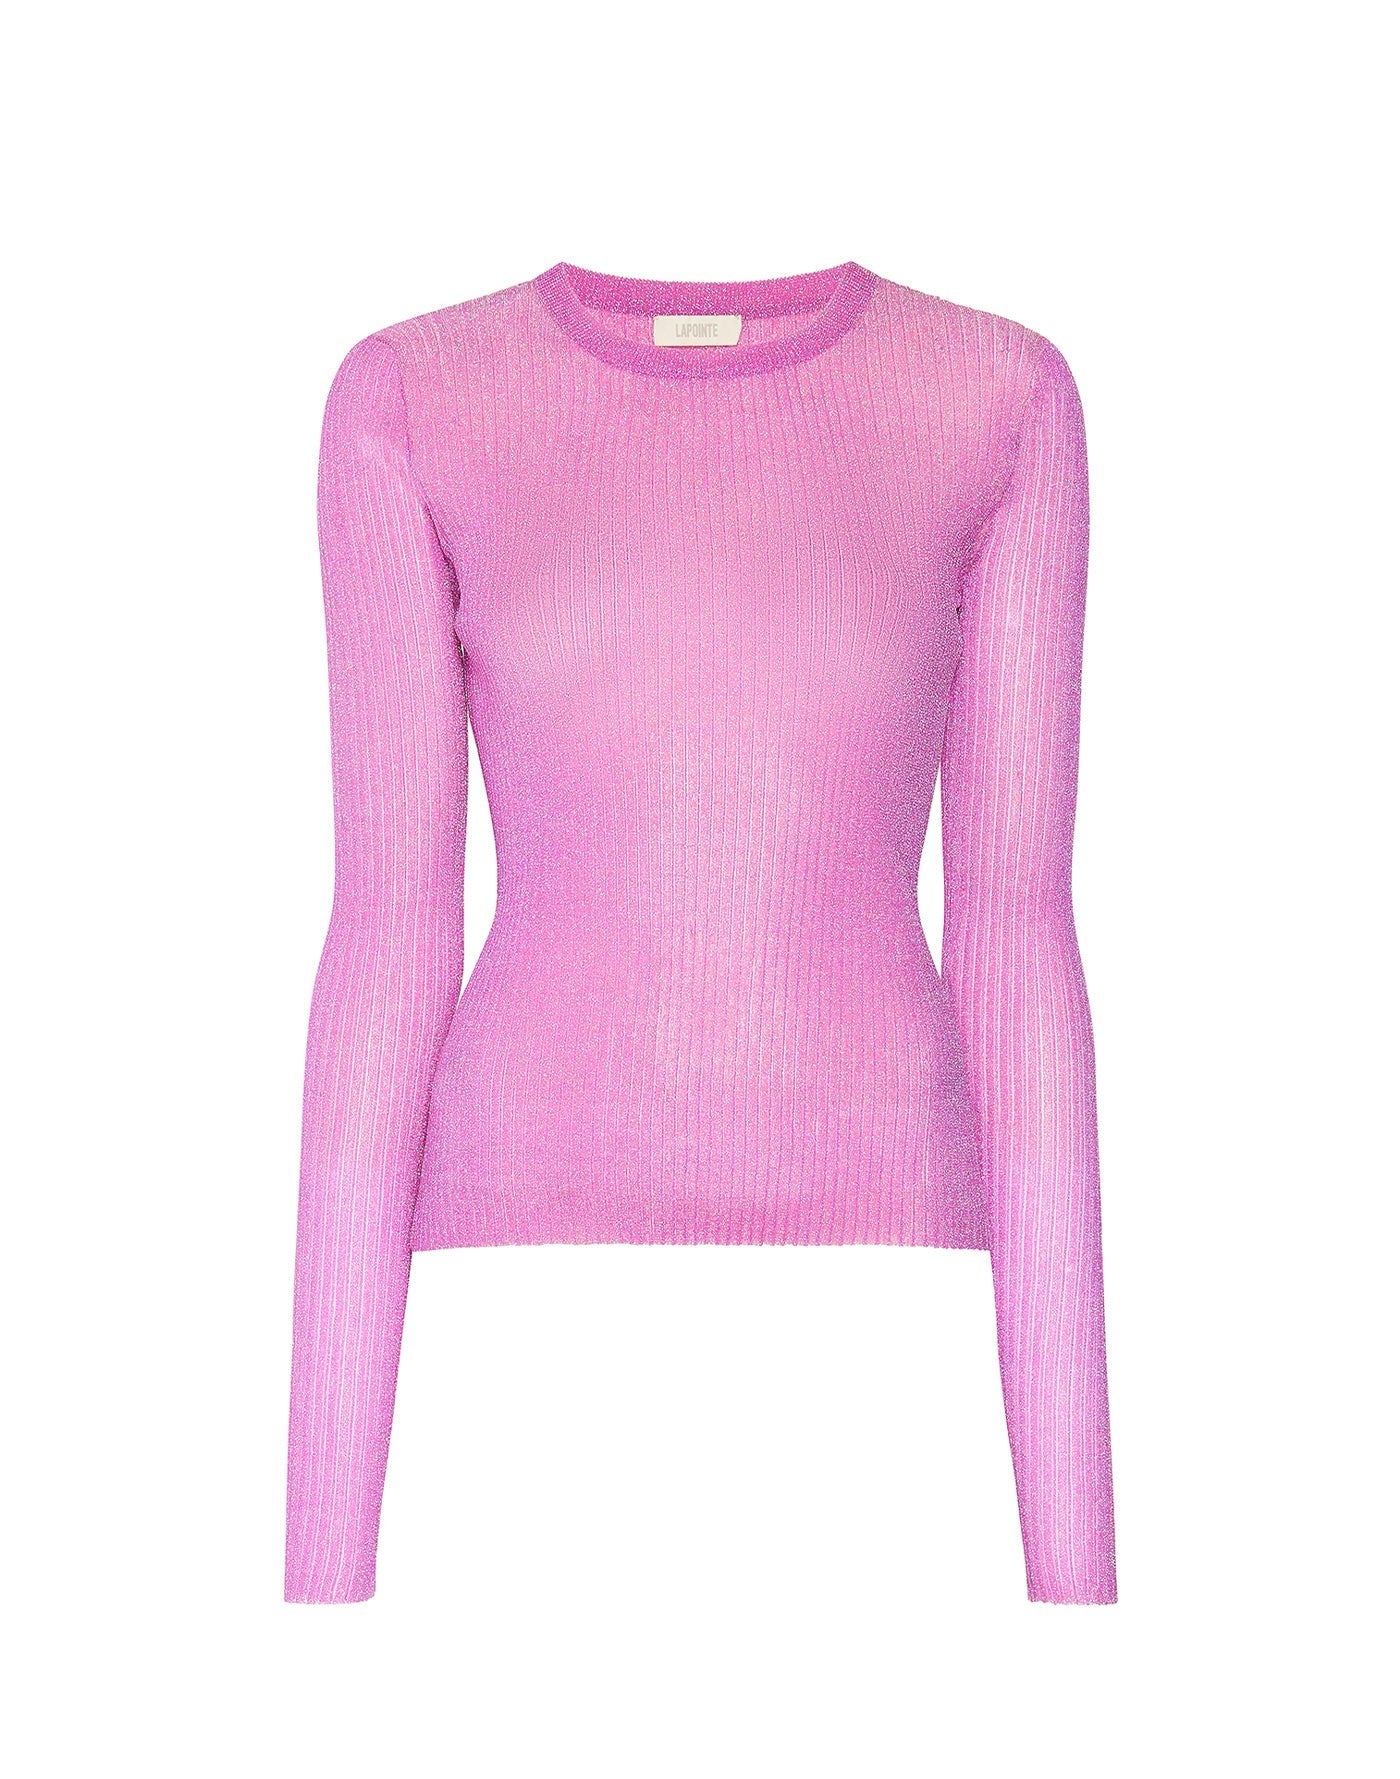 METALLIC PLISSE FITTED KNIT TOP - LAPOINTE